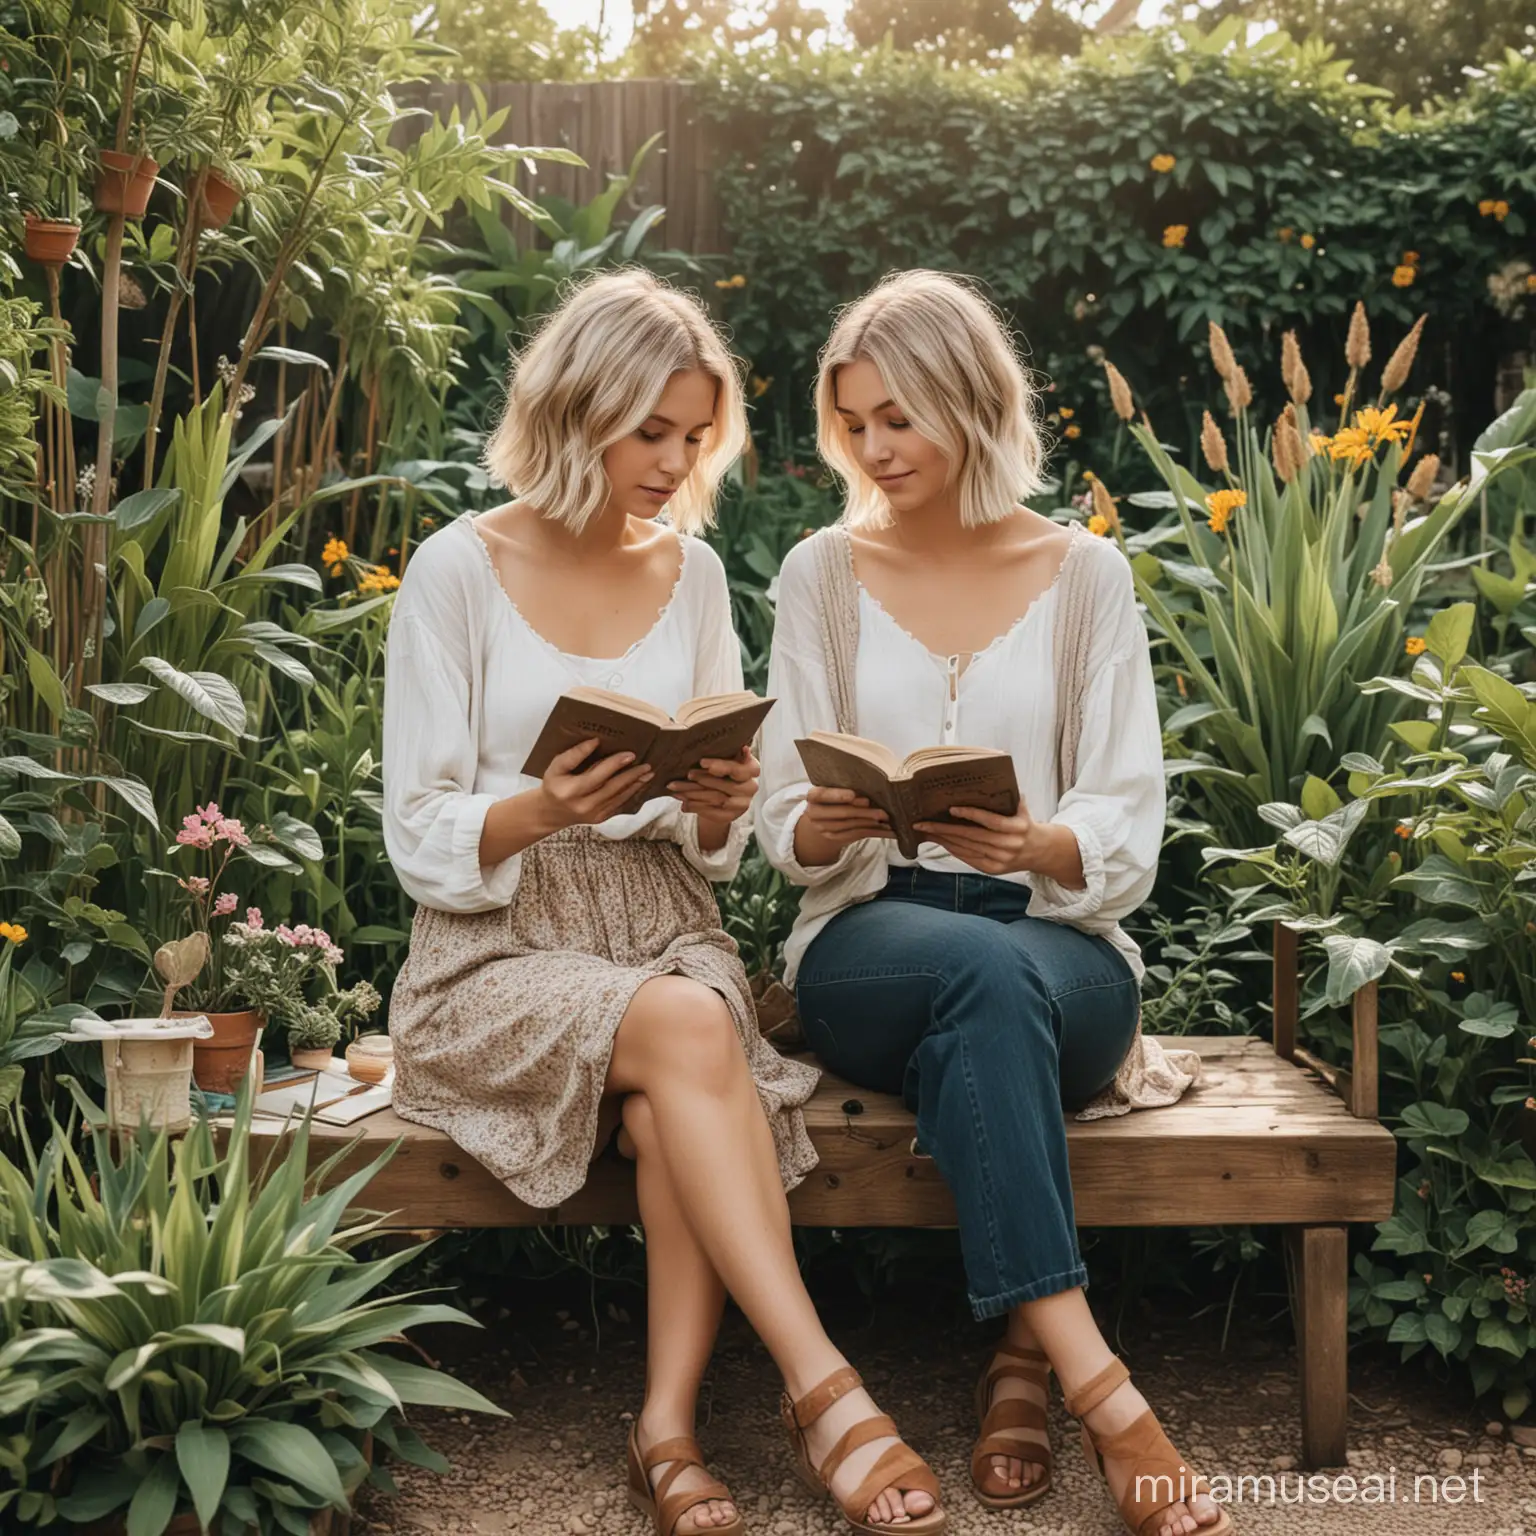 two faceless girls with short blonde hairs sitting i a boho garden and reading books
